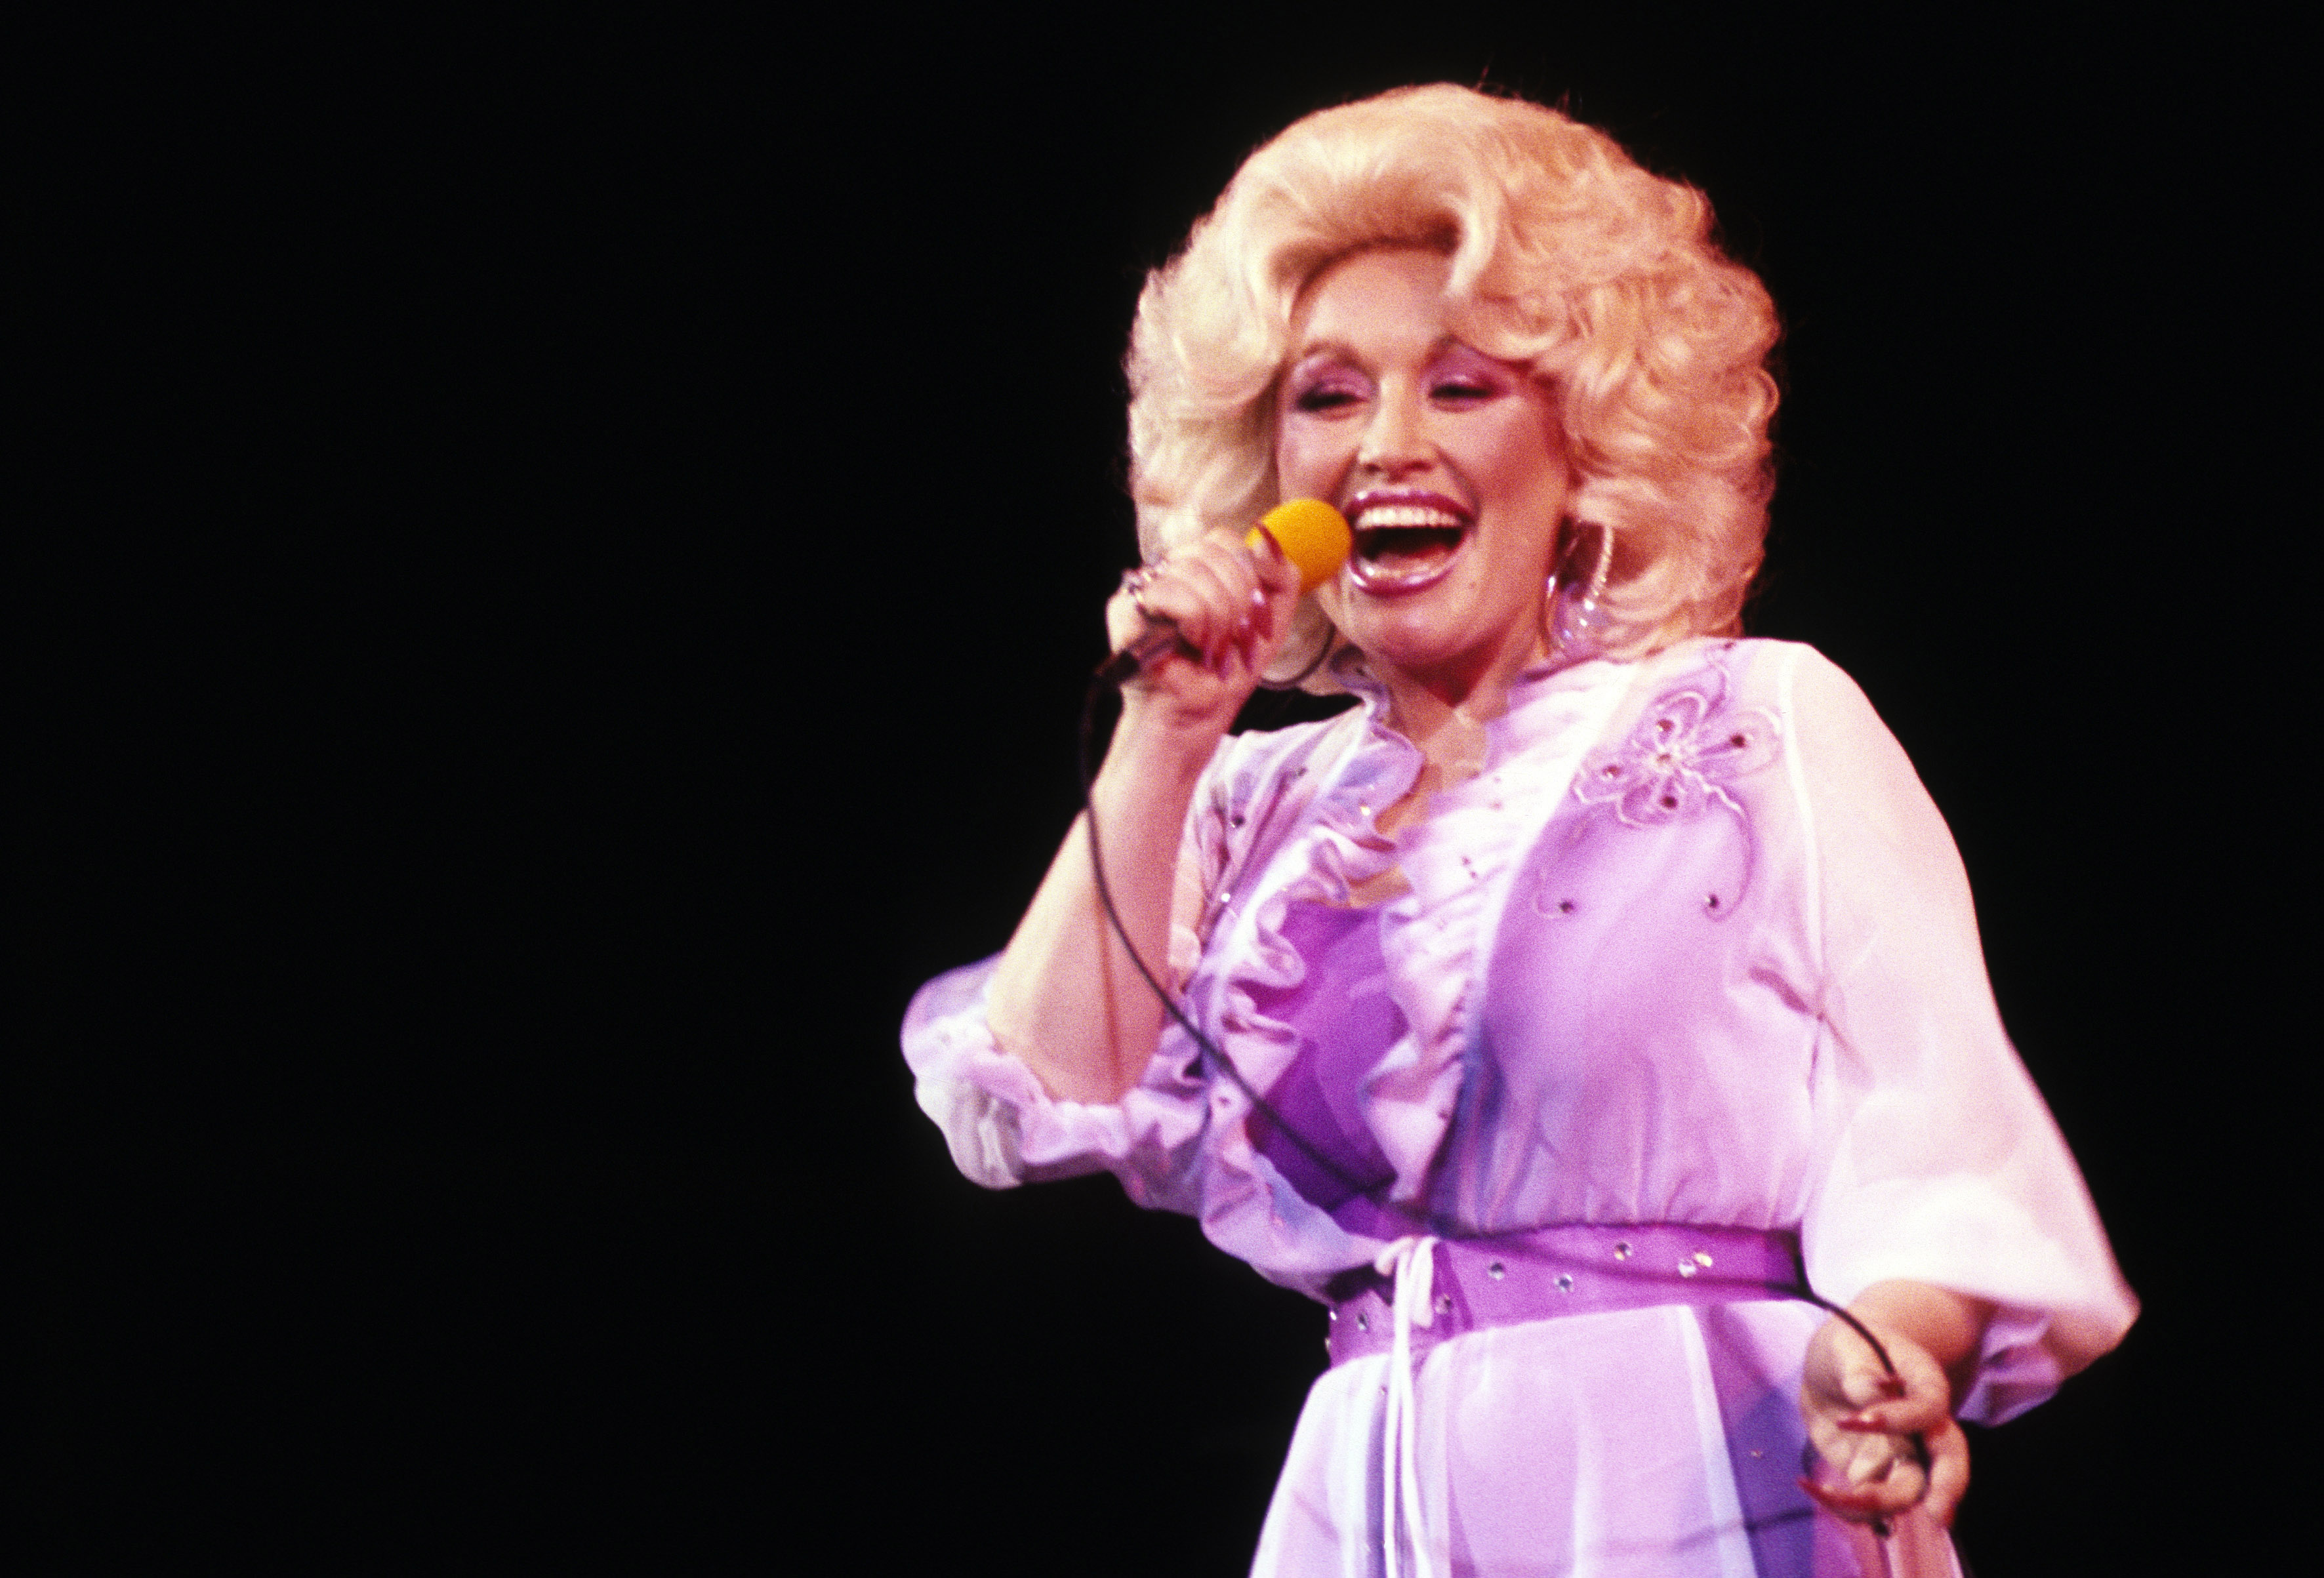 Dolly Parton wears a purple dress and sings into a microphone.